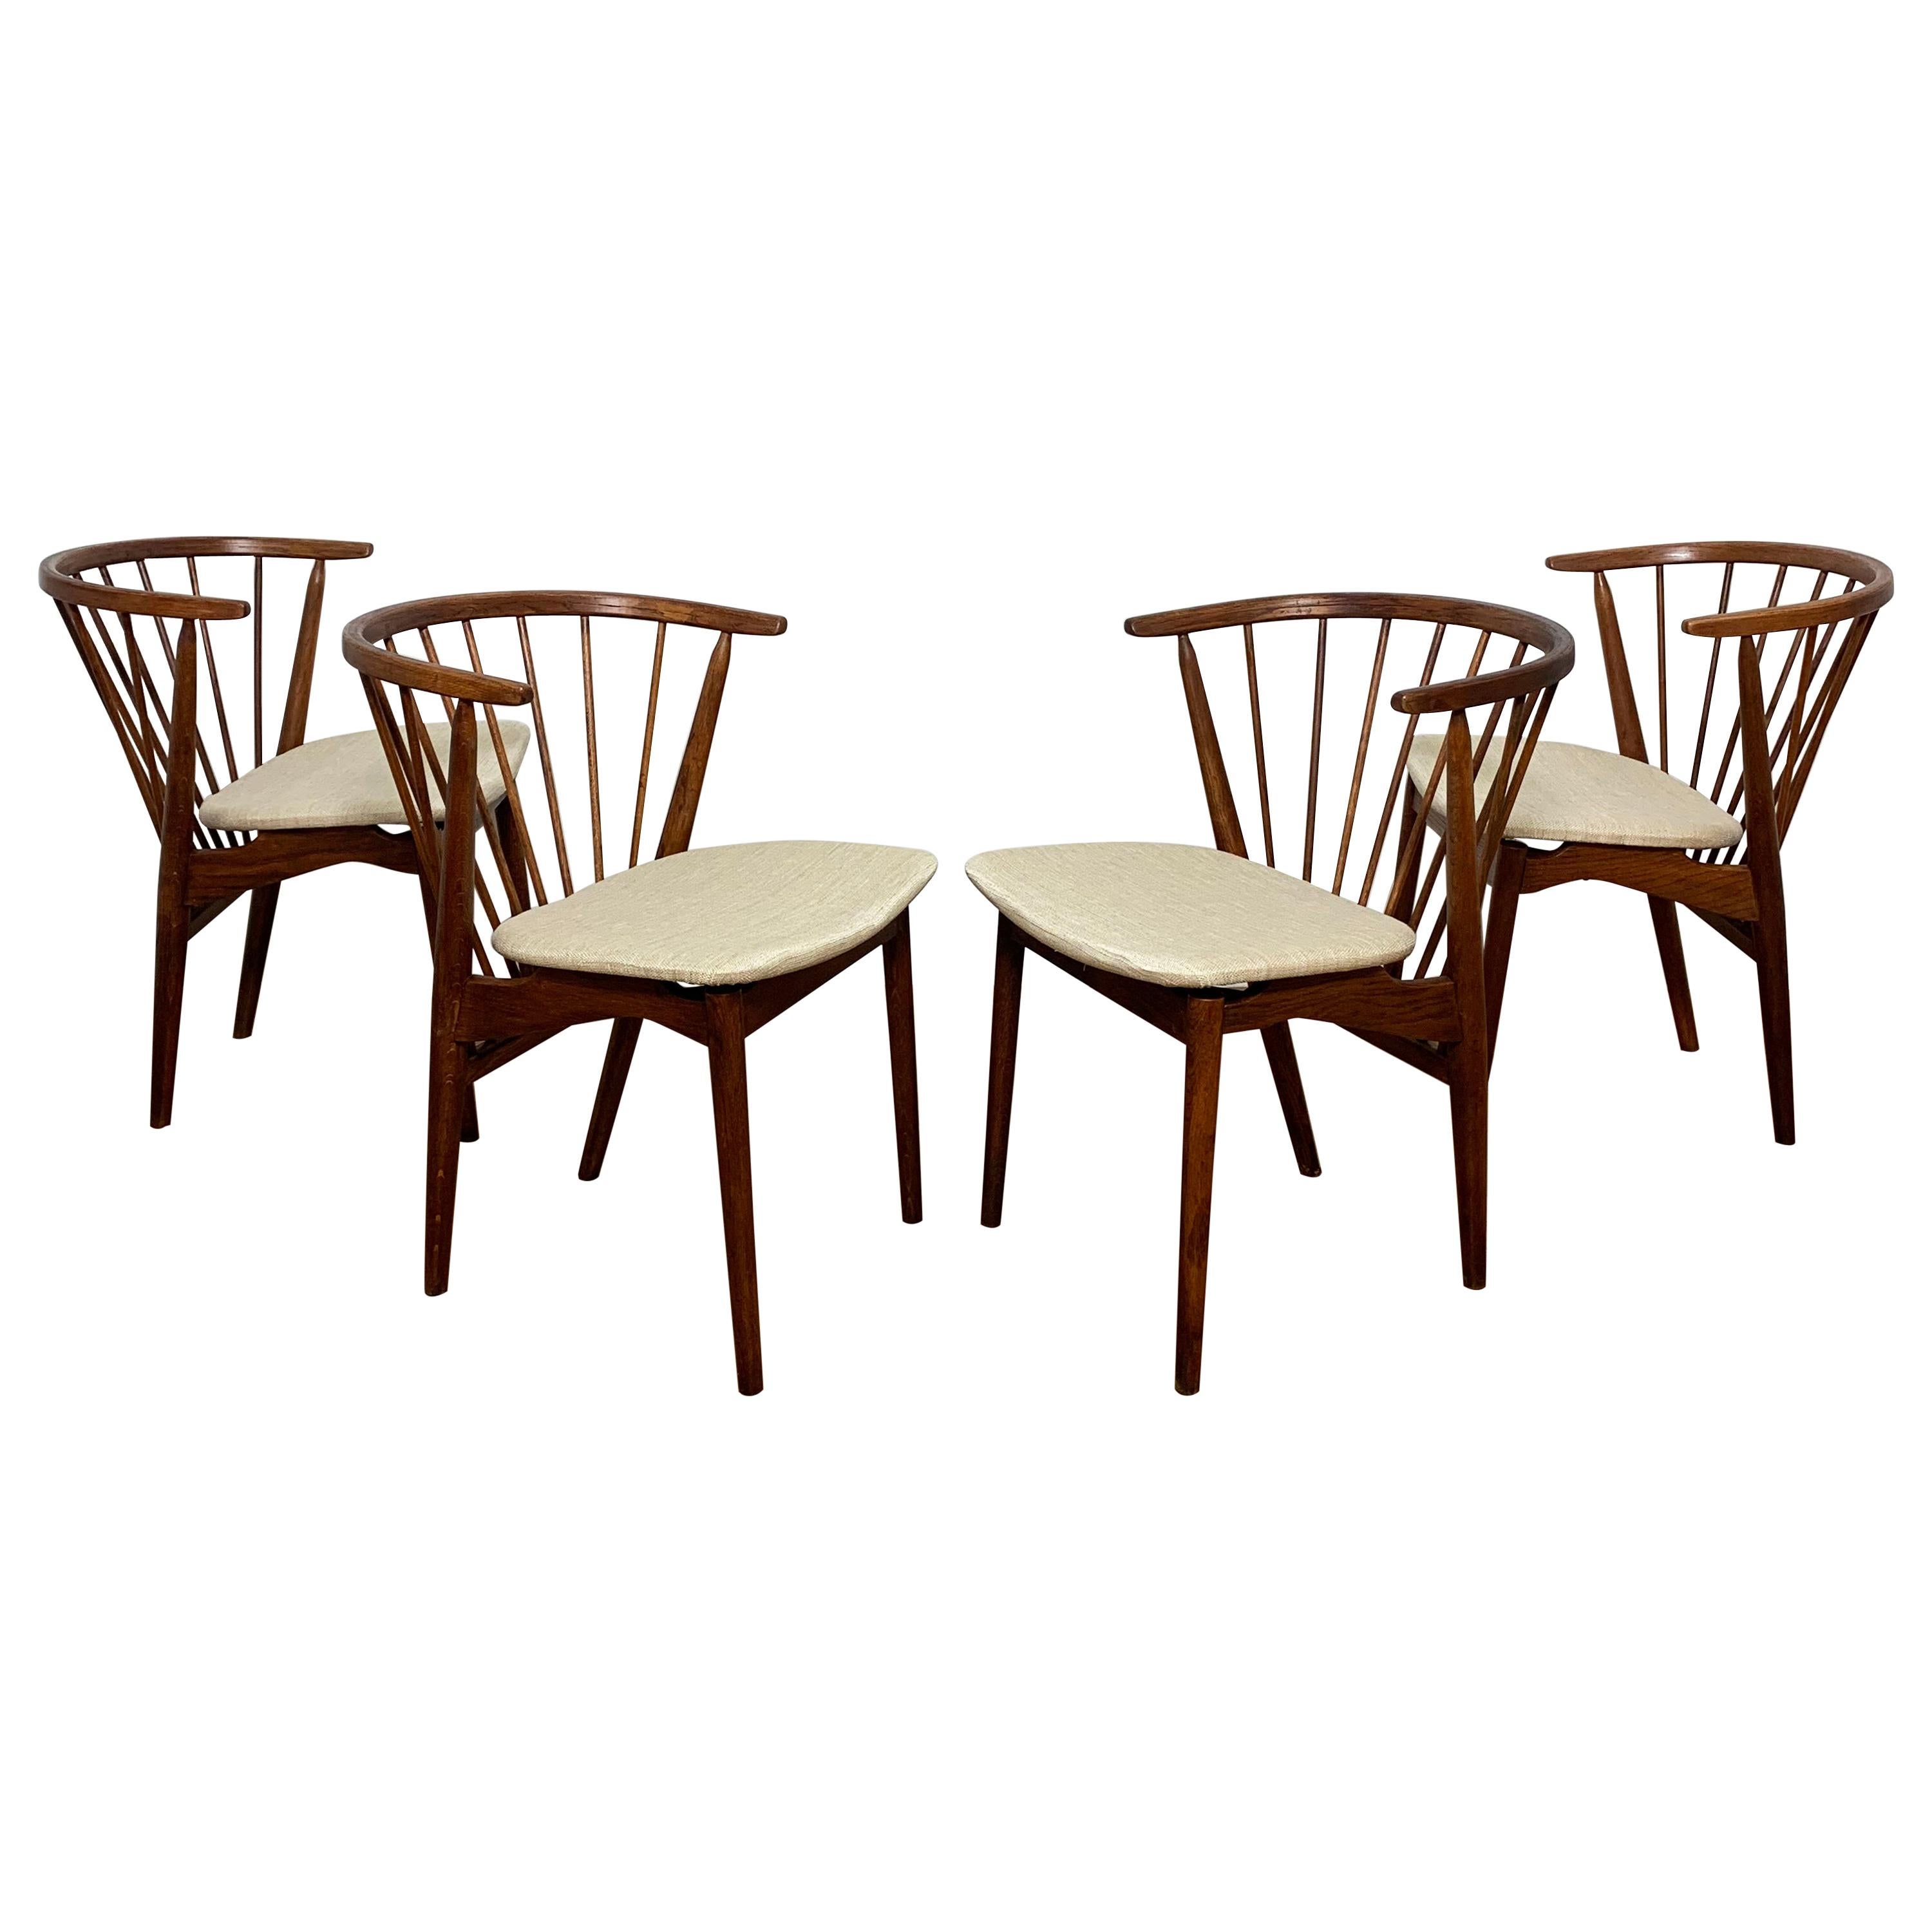 Set of Four Helge Sibast for Sibast Mobler "No. 6" Dining Chairs, Ca. 1950s